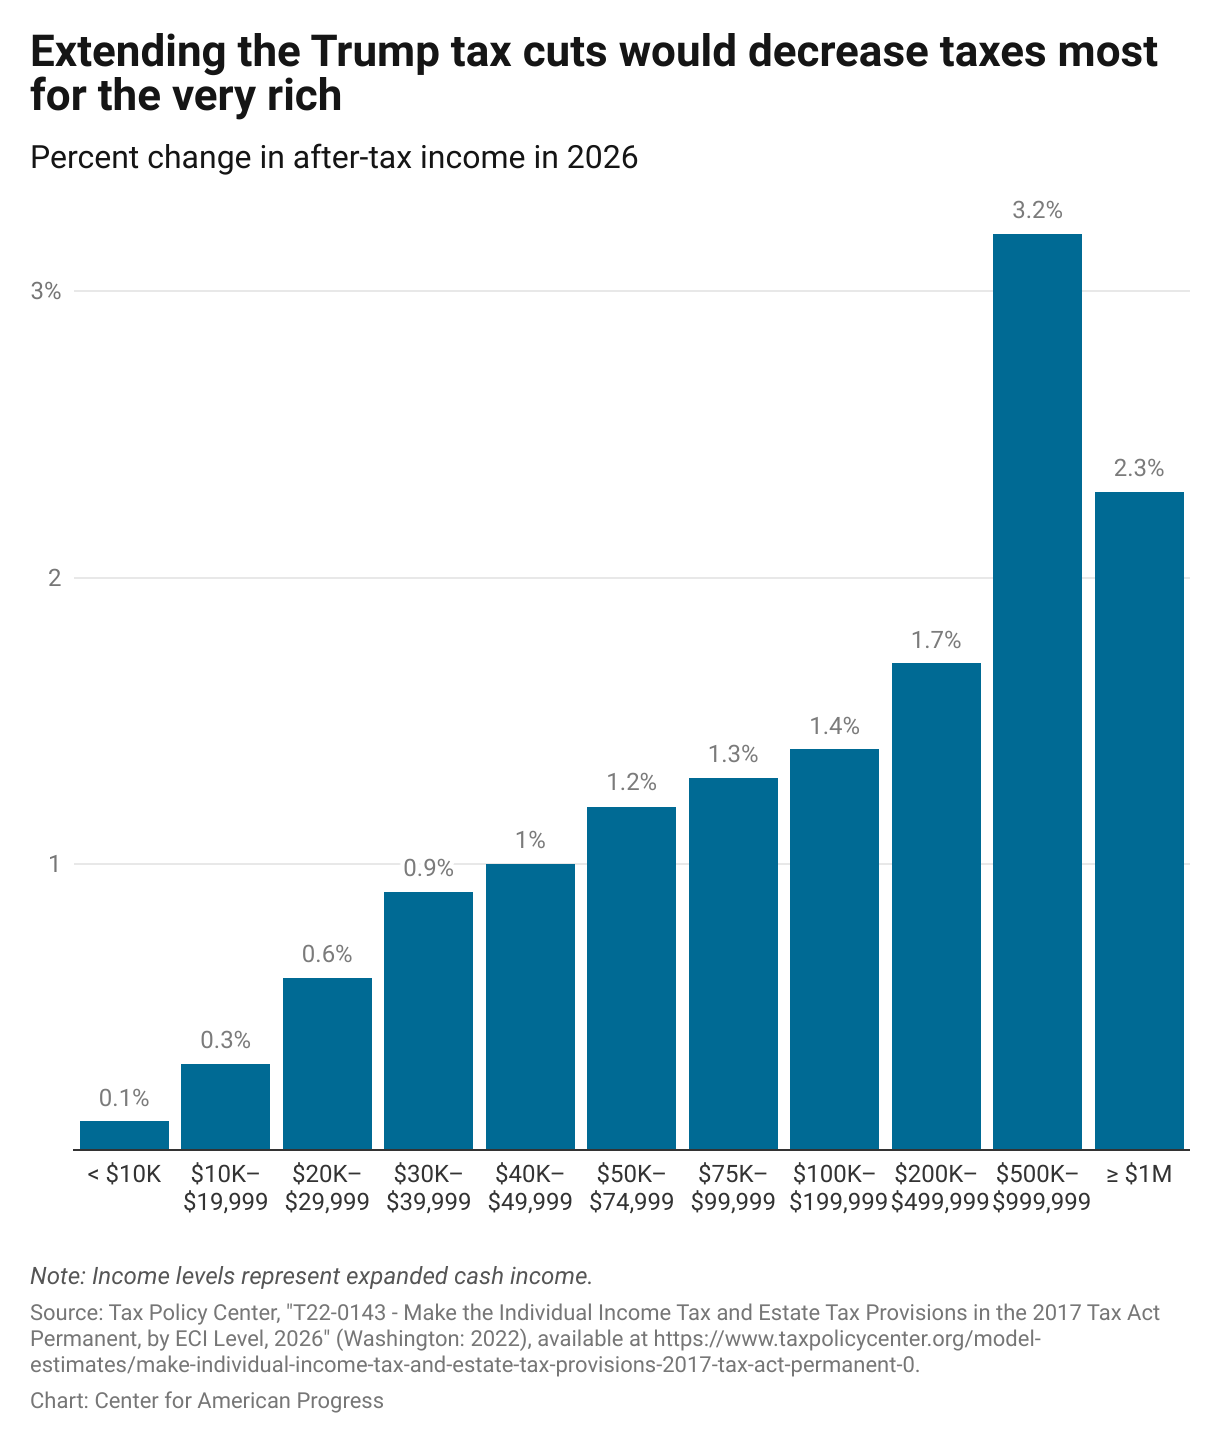 Bar graph showing that extending the Trump tax cuts would give the largest tax cut to the richest households and the smallest to the poorest households.